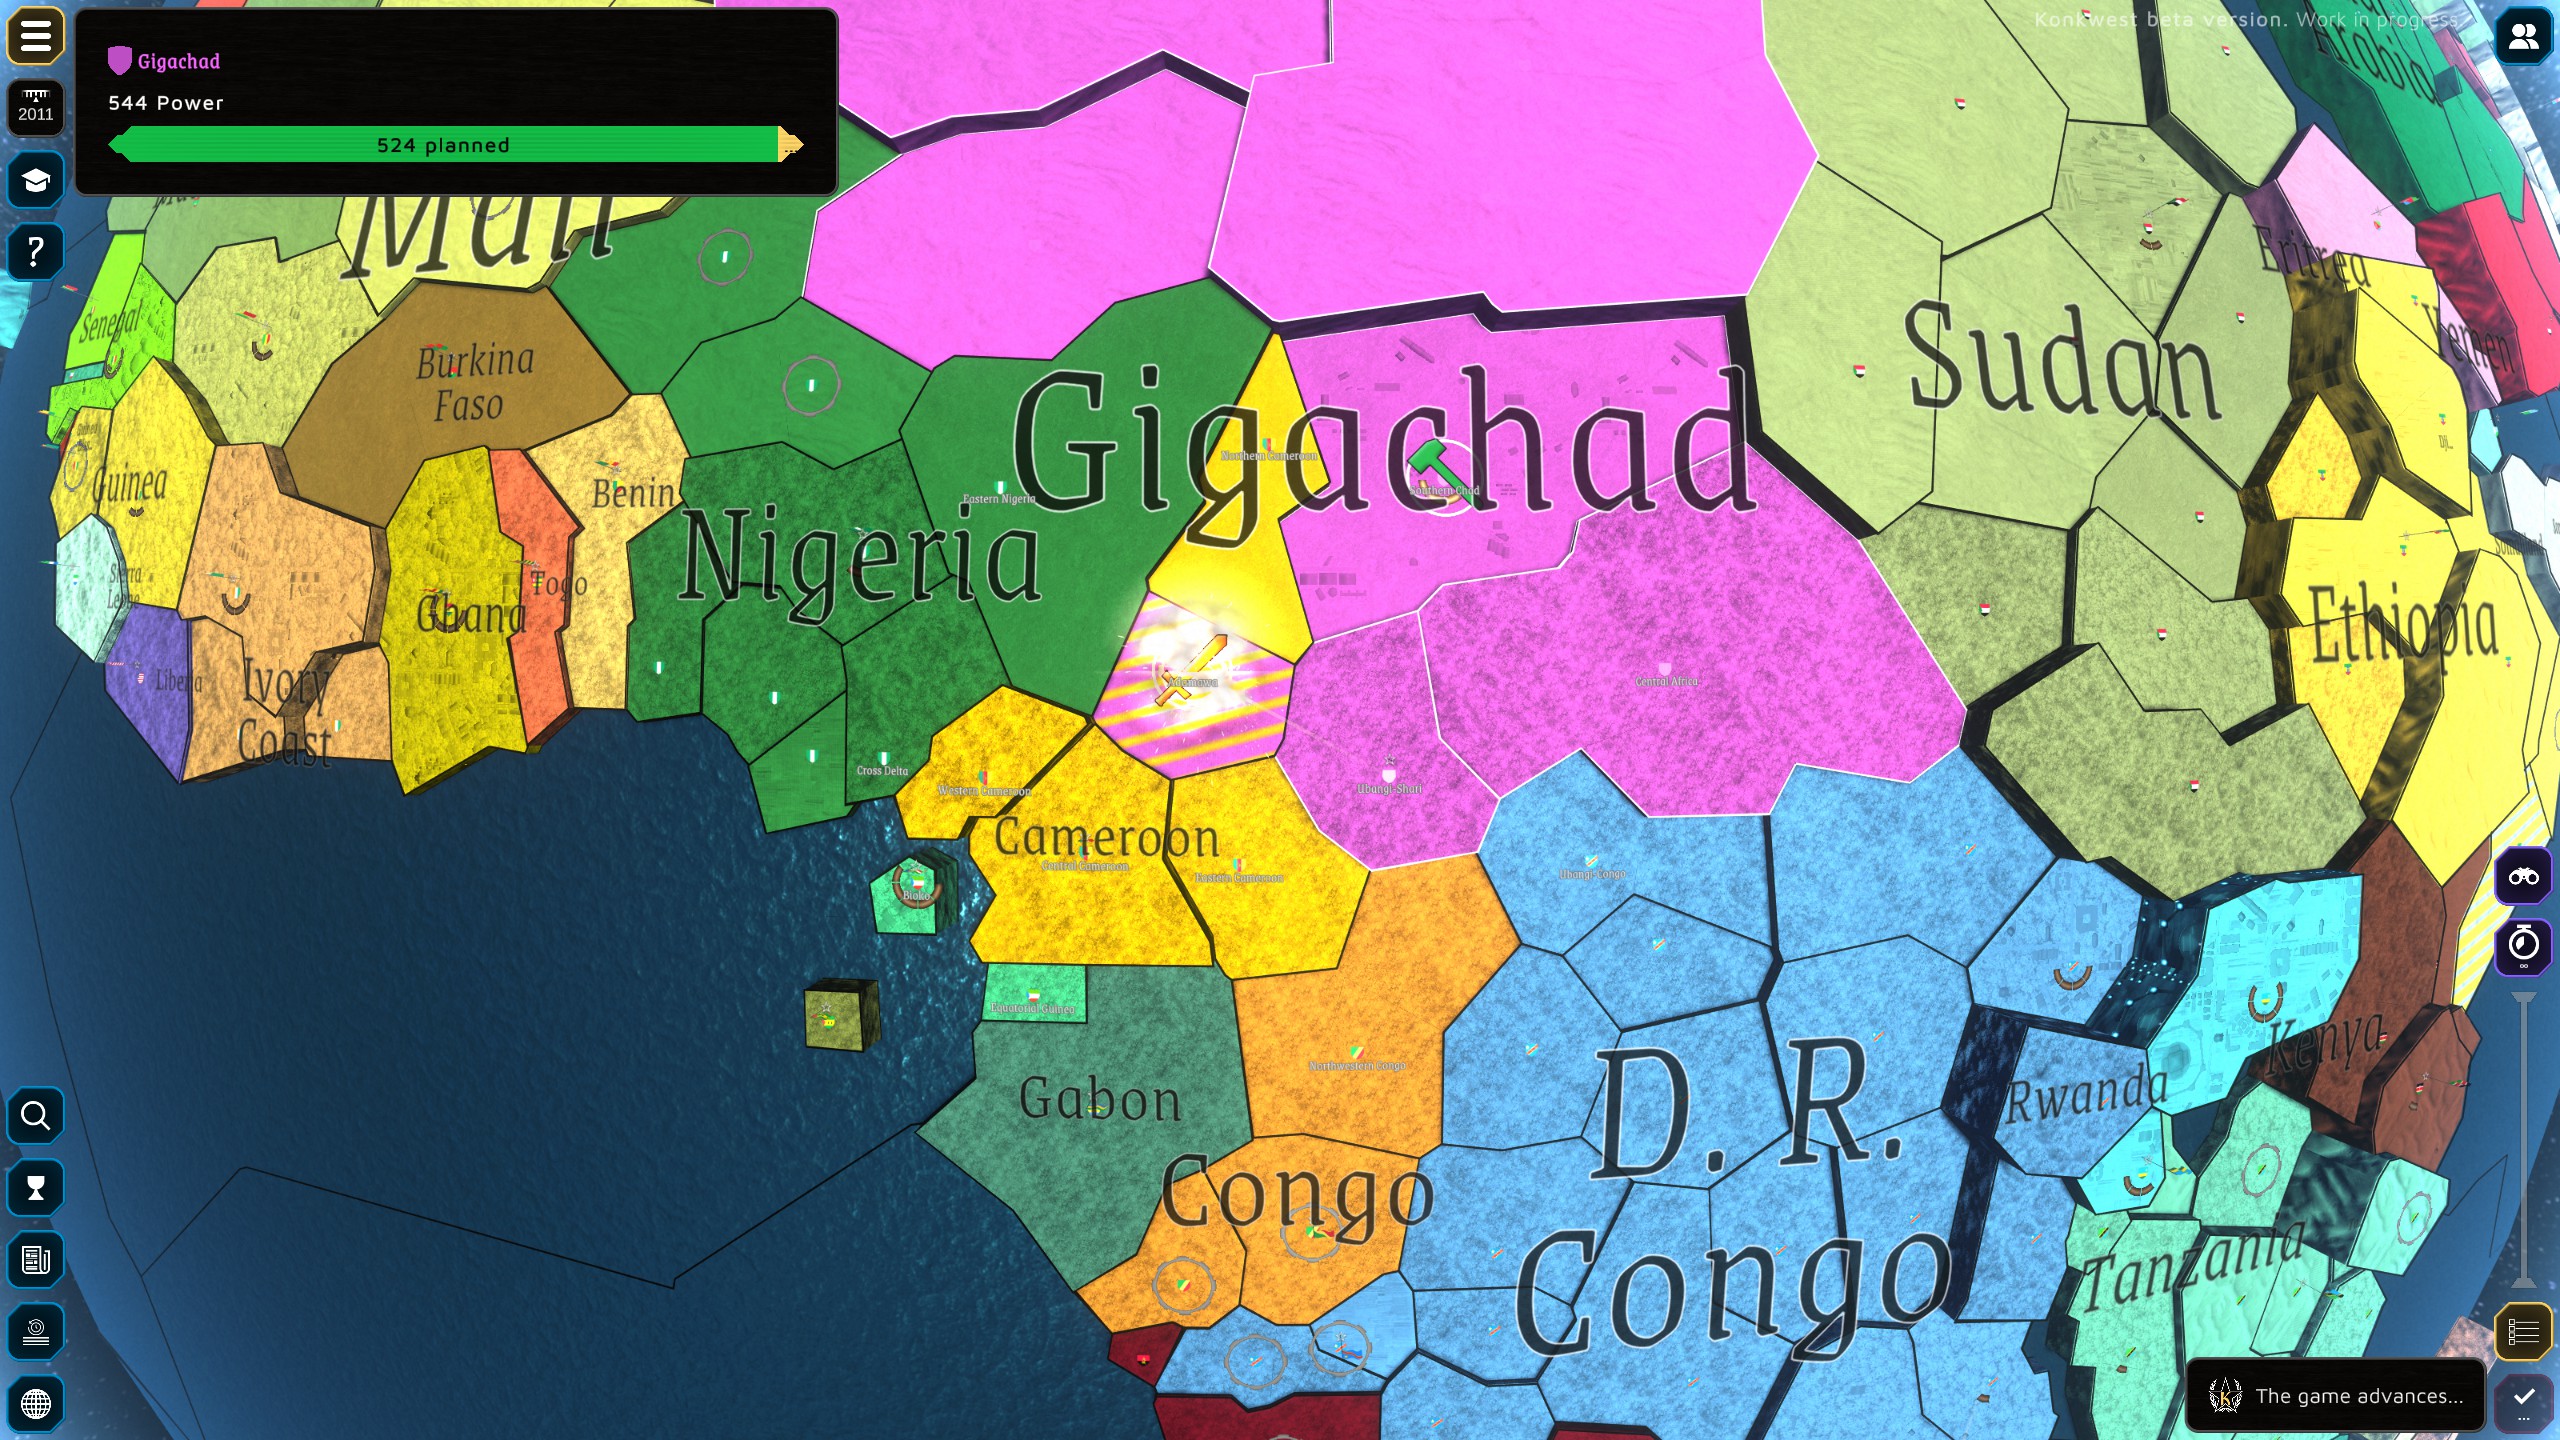 screenshot where a player plays as a country called Gigachad